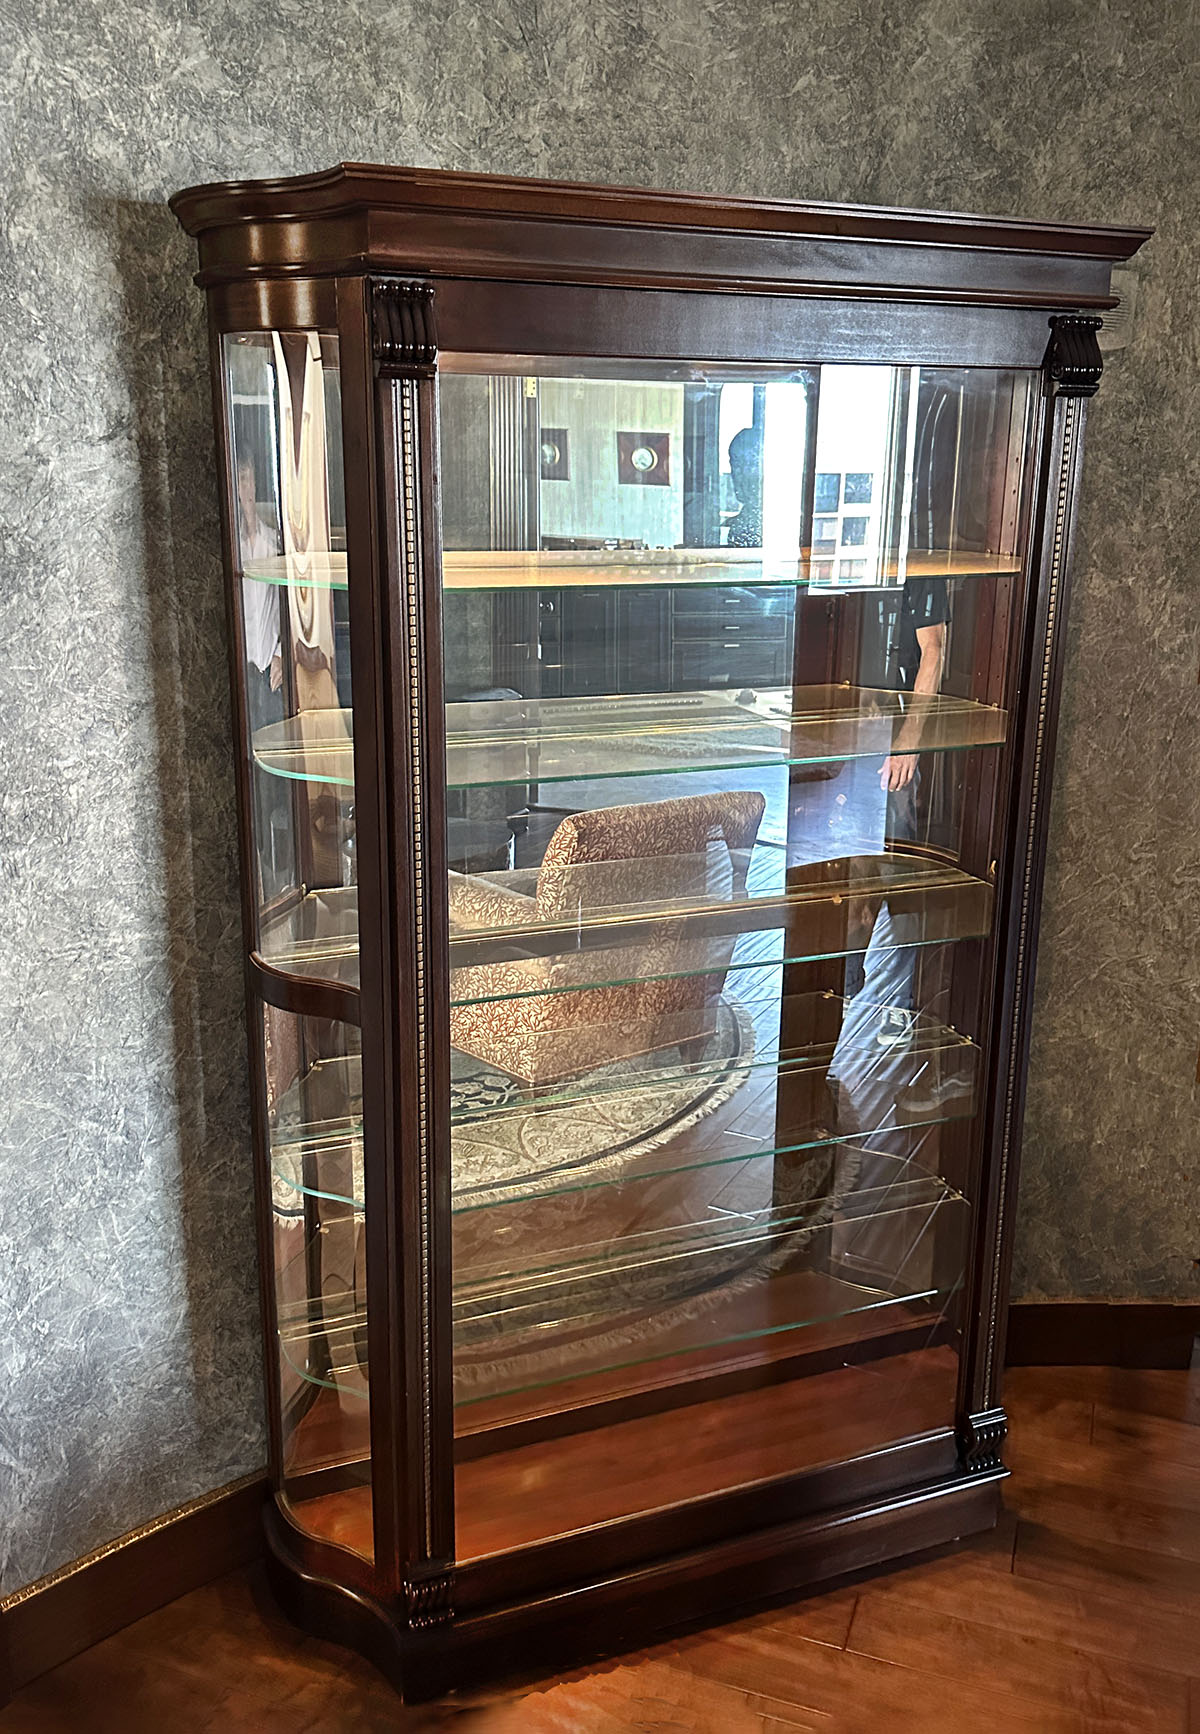 CURIO CHINA CABINET: With sliding glass